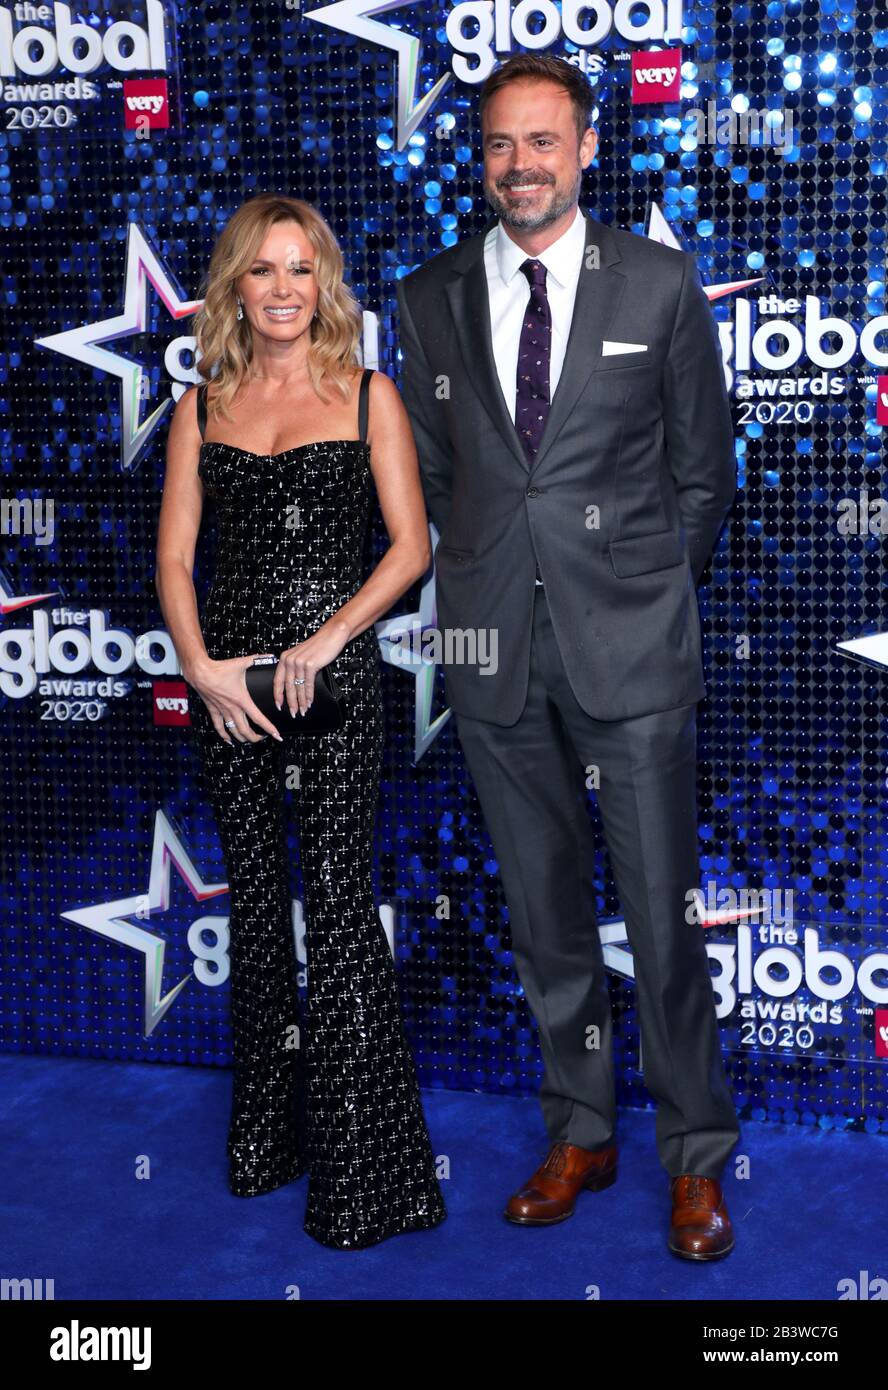 Amanda Holden and Jamie Theakston attend The Global Awards 2020 with Very.co.uk at London's Eventim Apollo Hammersmith. Stock Photo